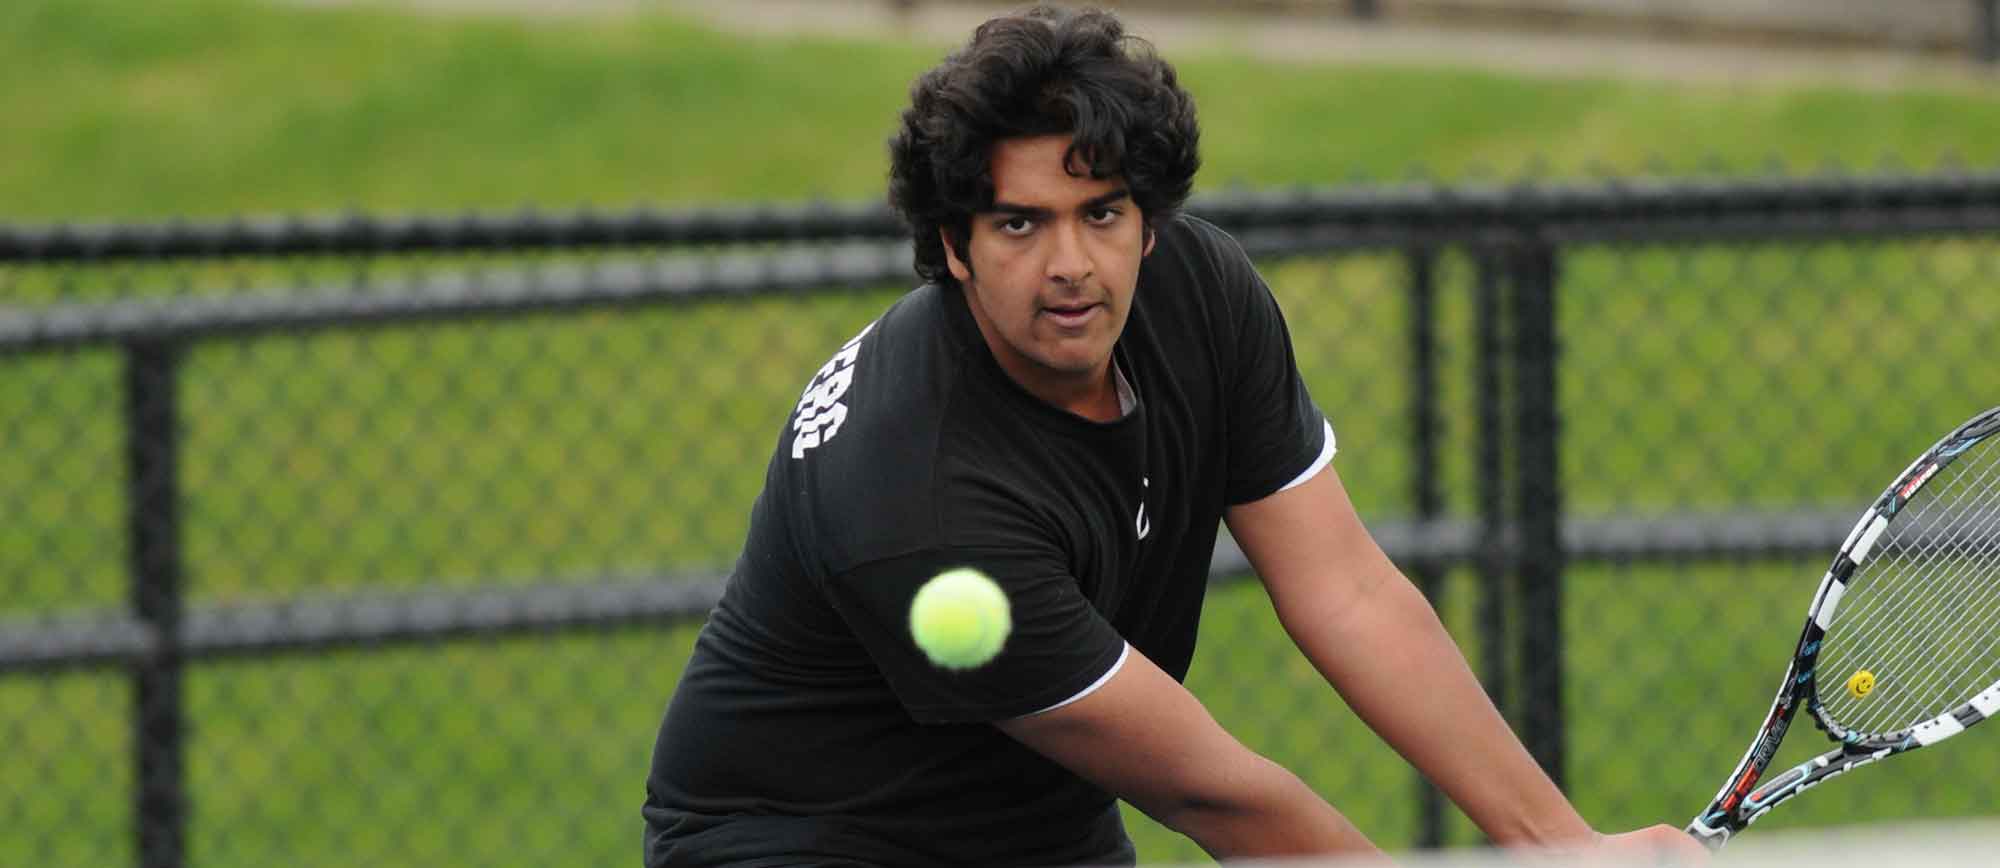 Akbar Tiwana teamed with Timmy McNulty for a win at No. 2 doubles against Hanover. File Photo | Nick Falzerano